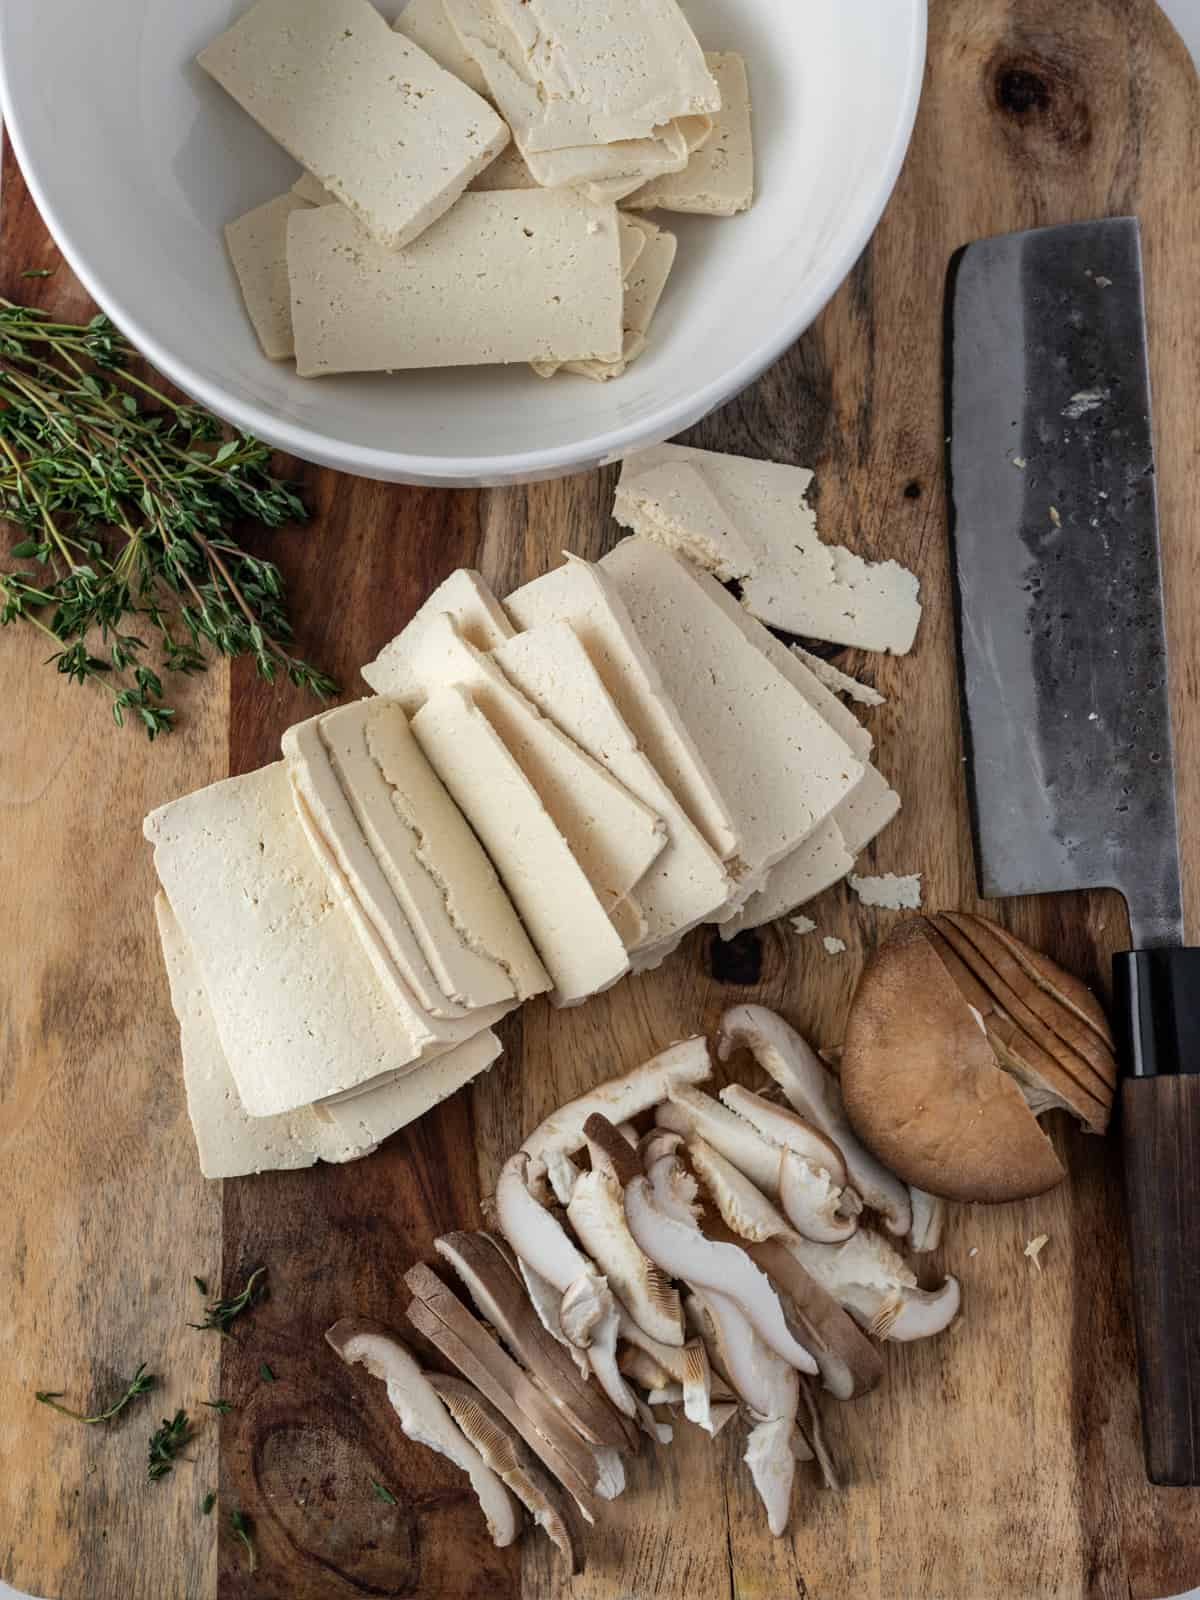 Slices of tofu in a white bowl and on a wooden cutting board with sliced mushrooms and a knife.